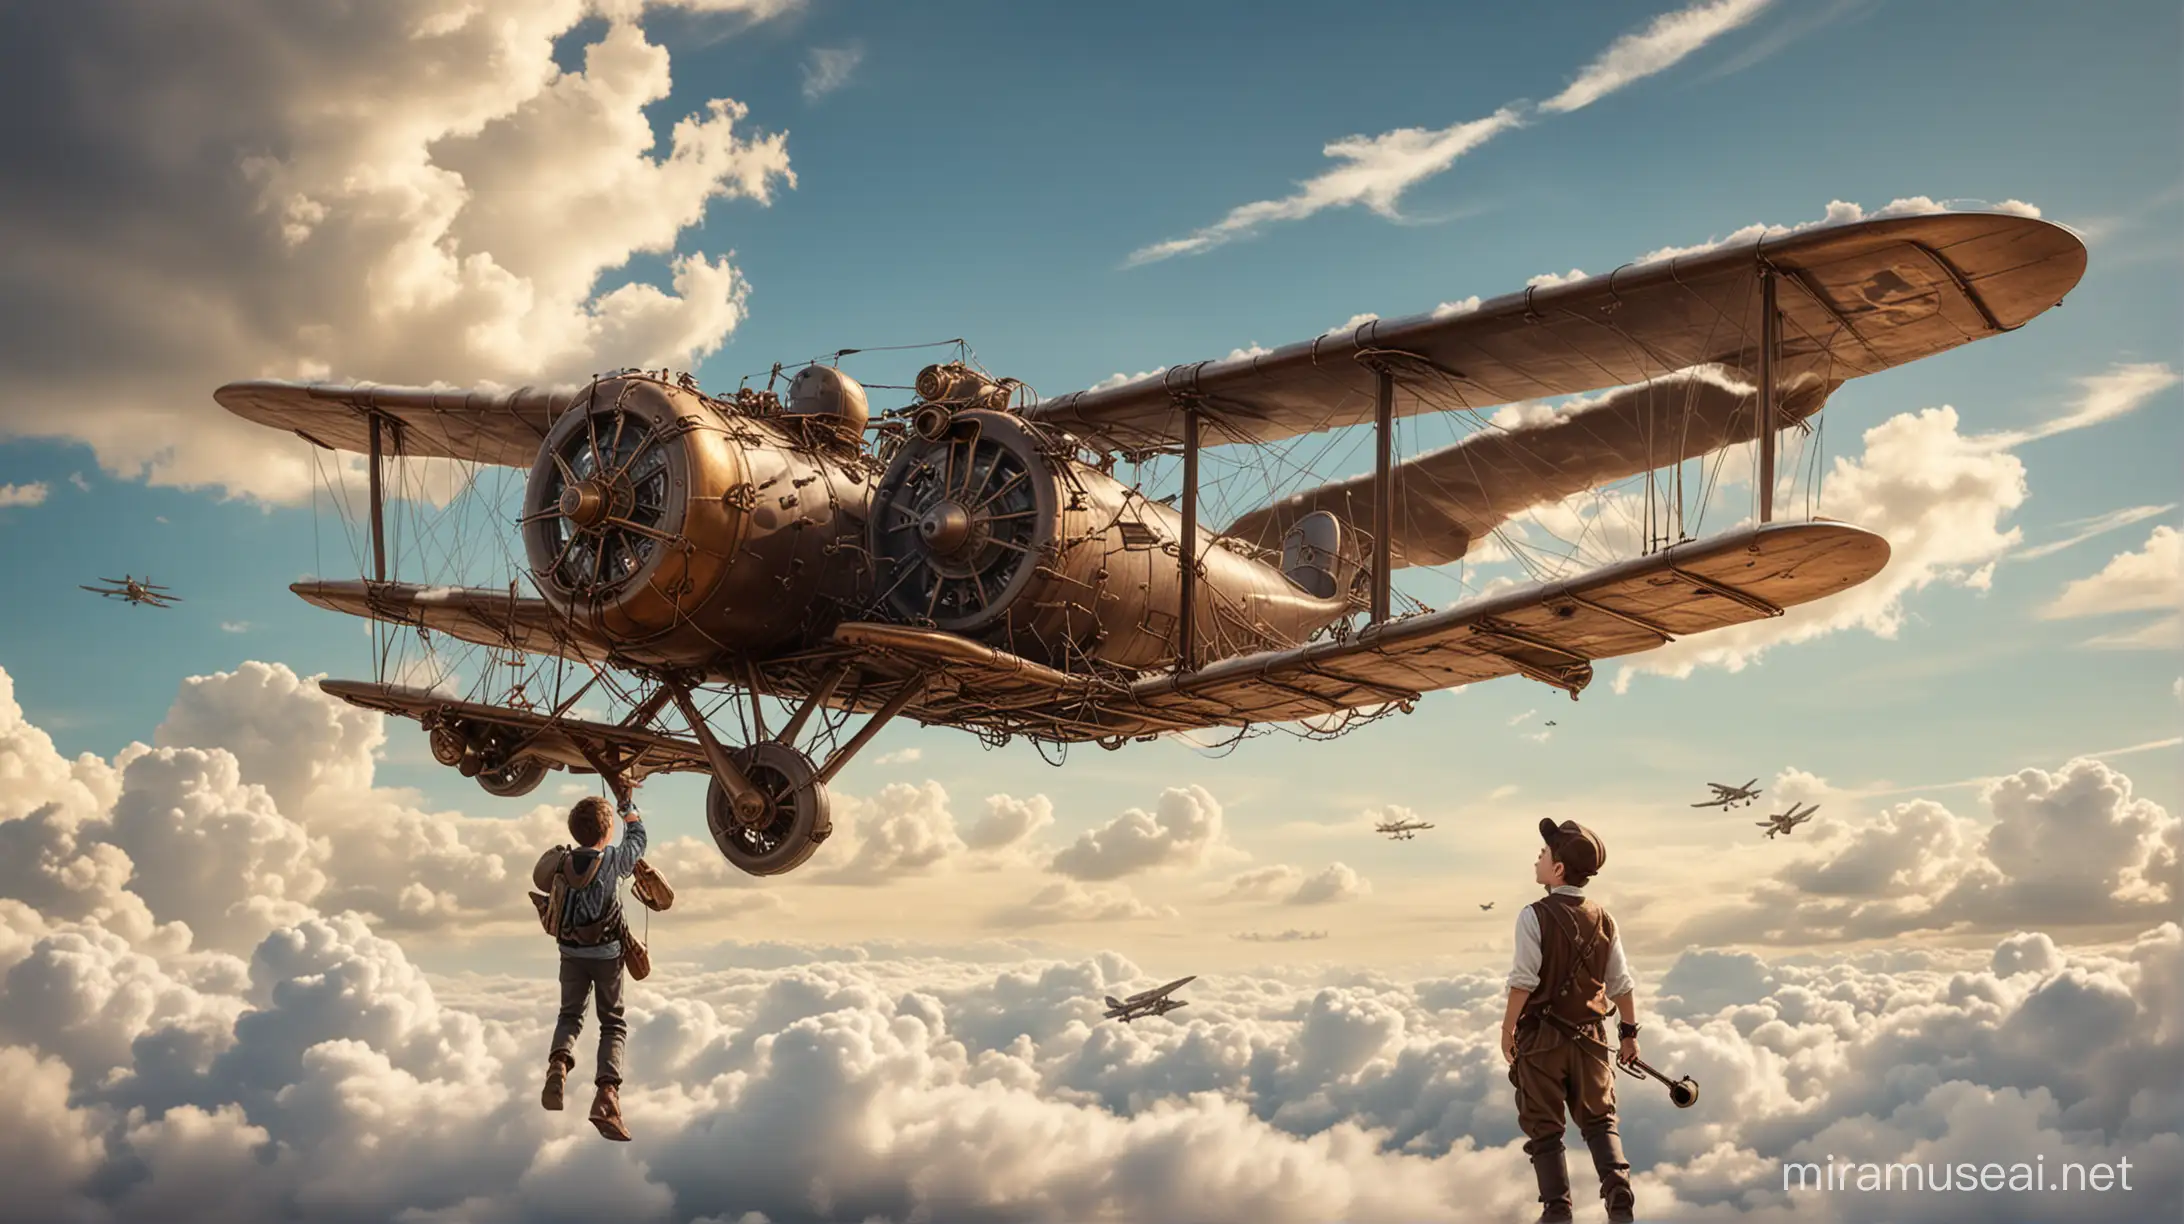 a boy who have a dream fly to the sky by steam airplane, Steampunk era